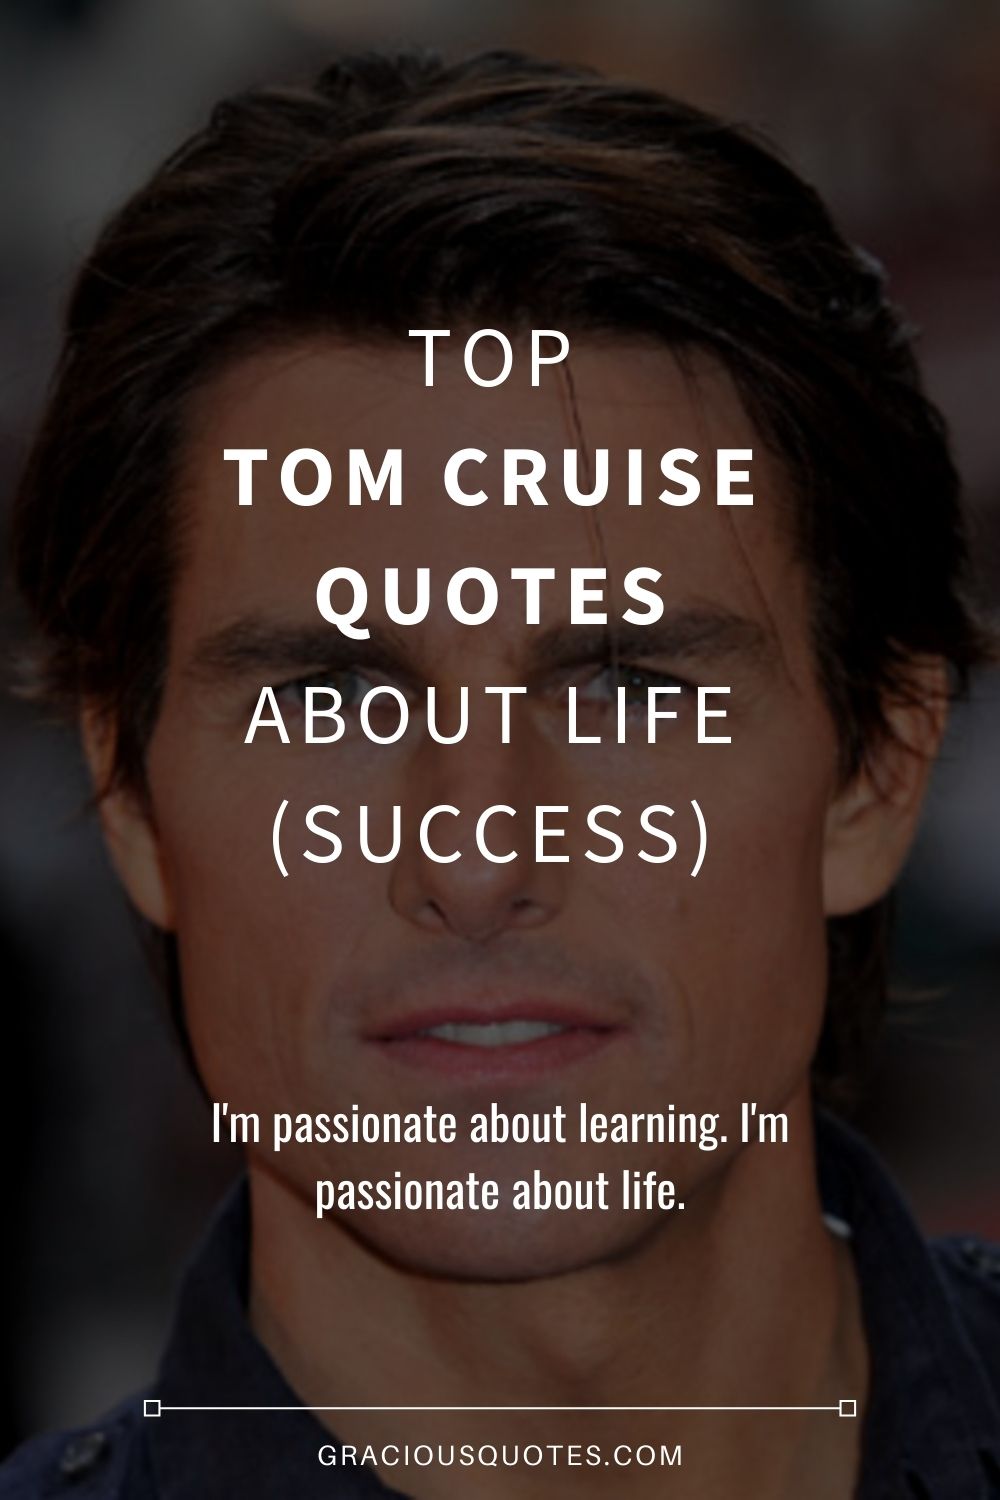 Top Tom Cruise Quotes About Life (SUCCESS) - Gracious Quotes